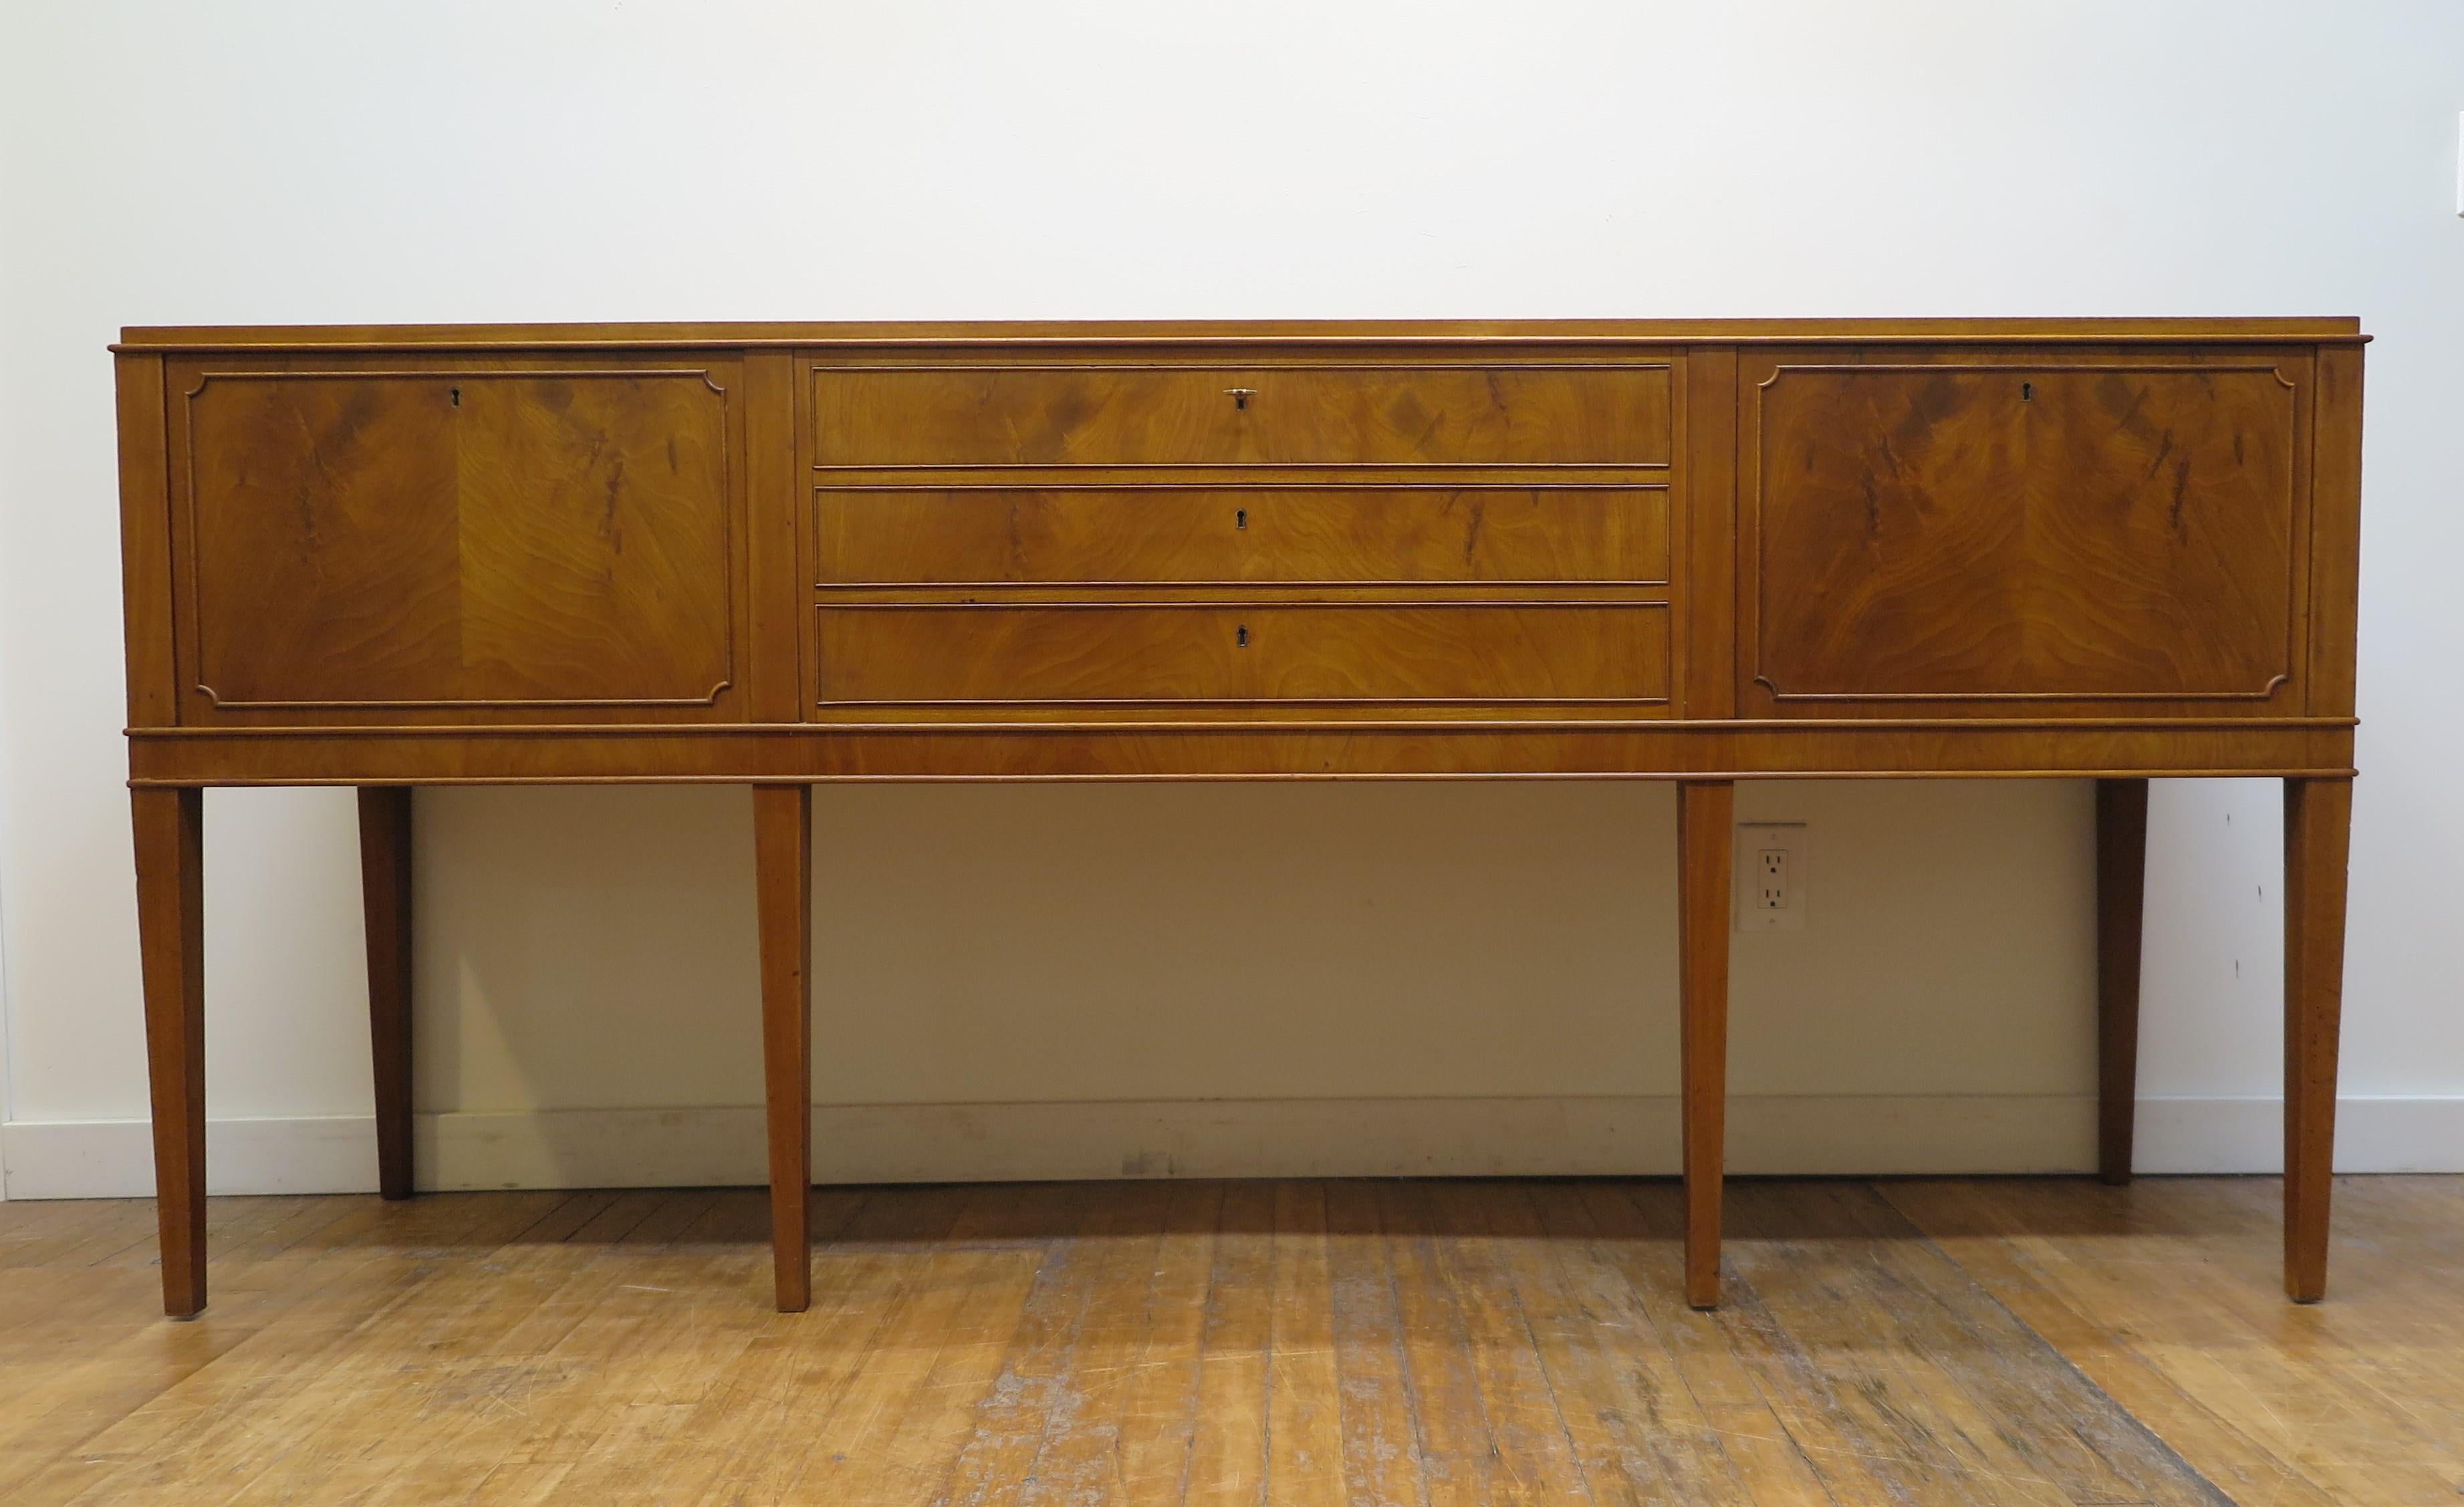 Frits Henningsen Mahogany Sideboard.  A Danish mahogany sideboard by cabinetmaker Frits Henningsen.  An executive styled sideboard having downward cabinet doors and three drawers all locking with two keys.  The Danish Design Movement of the 1920'